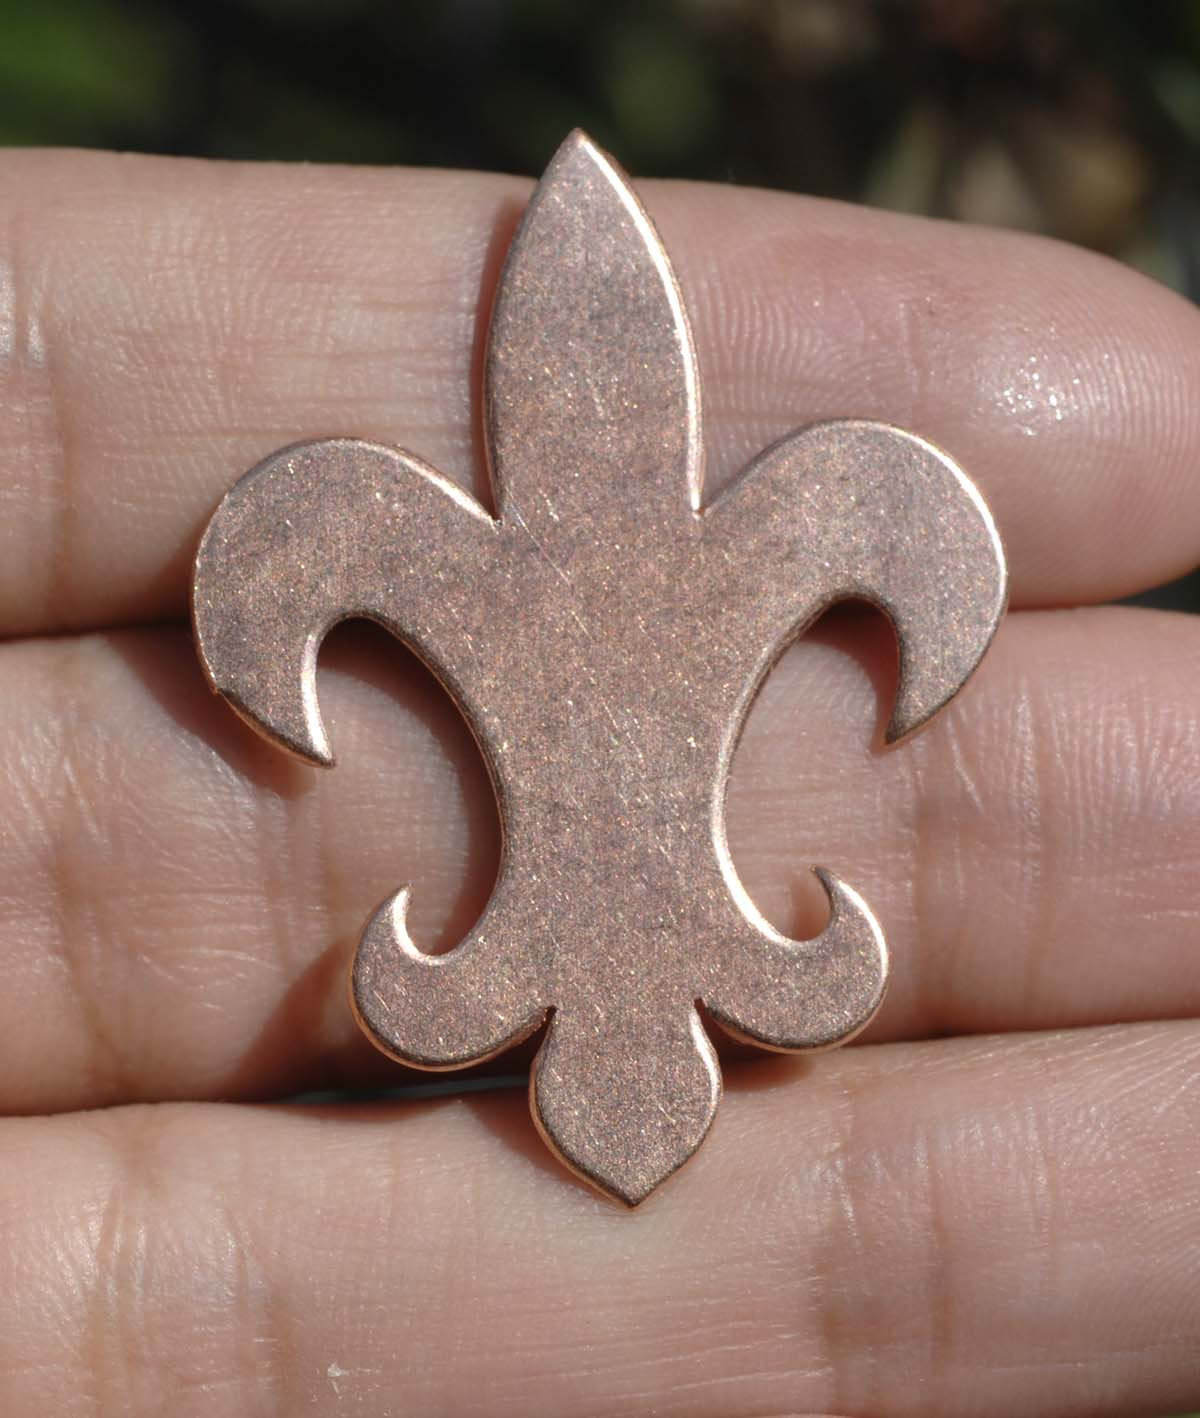 Fleur De Lis Charm 39mm x 29.6mm for Enameling Stamping Texturing Blank - Metal Supplies, Variety of Metals